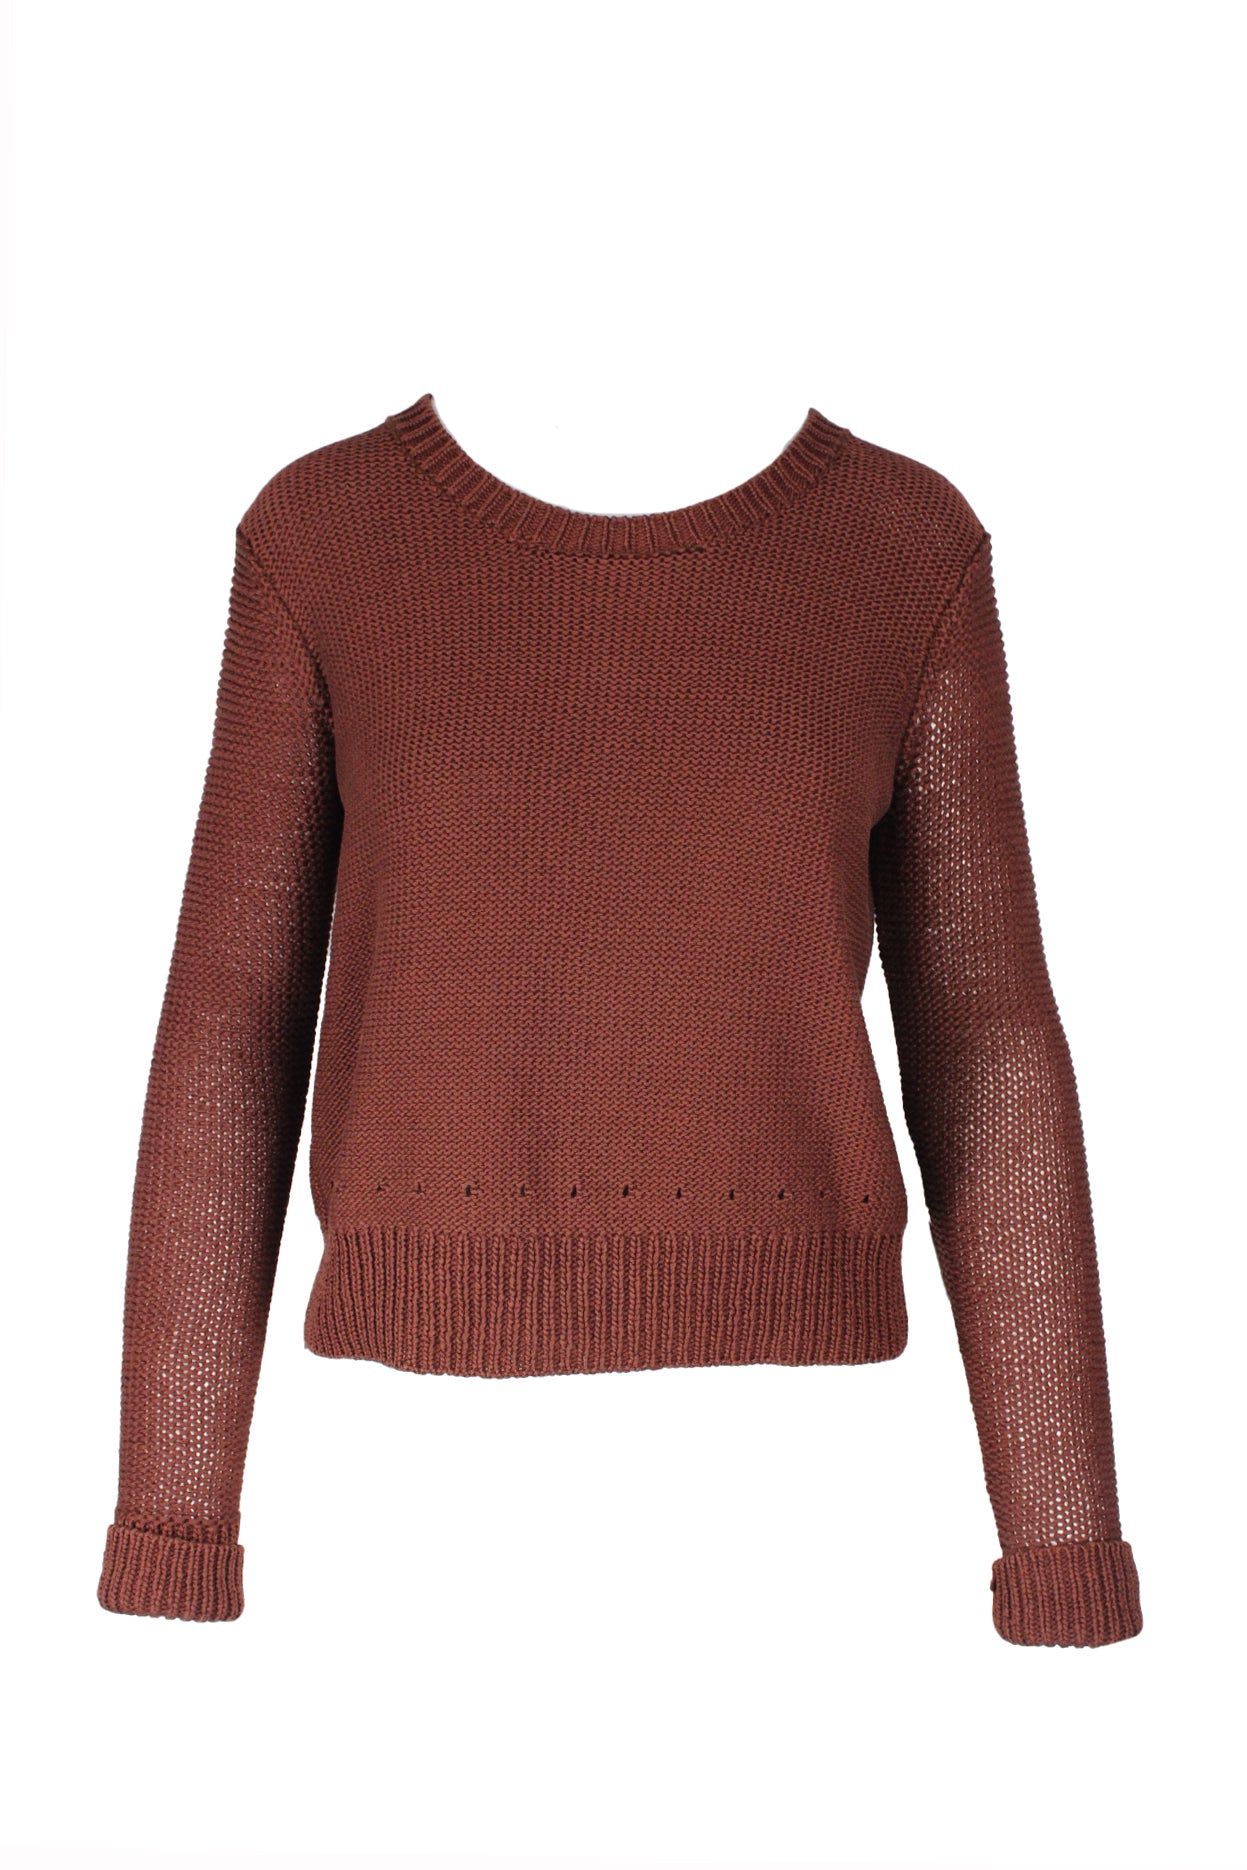 alexander wang brown long sleeve sweater. features crew neckline, ribbed trim, and pull on style; relaxed fit.  detail row of holes near ribbed hem near hip. 